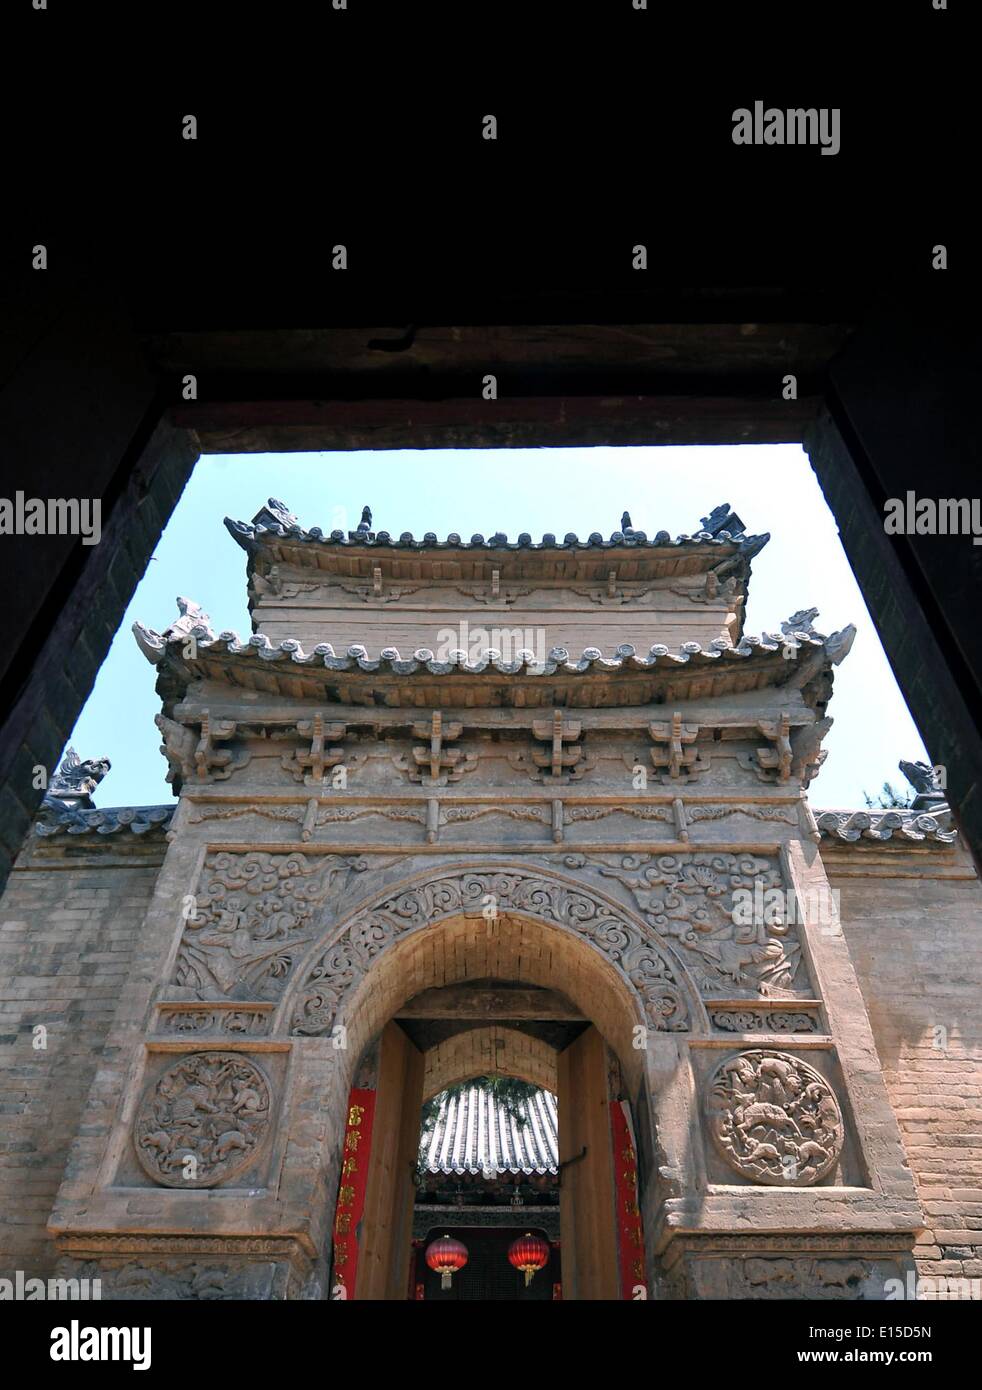 (140523) -- ZHENGZHOU, May 23, 2014 (Xinhua) -- Photo taken on May 24, 2010 shows the stone relief on the main gate of the Anguo Temple, which was first established during the Sui Dynasty (581-618 AD), in Licun Township of Shanxian County, central China's Henan Province. A large number of architectural sculptures have been preserved in historical sites of Henan, which is one of the cradles of the Chinese civilization. Many of the sculptures, created from stones, bricks, or wood, were used as building parts of residences, shrines and memorial archways, among other architecture types. Underlinin Stock Photo